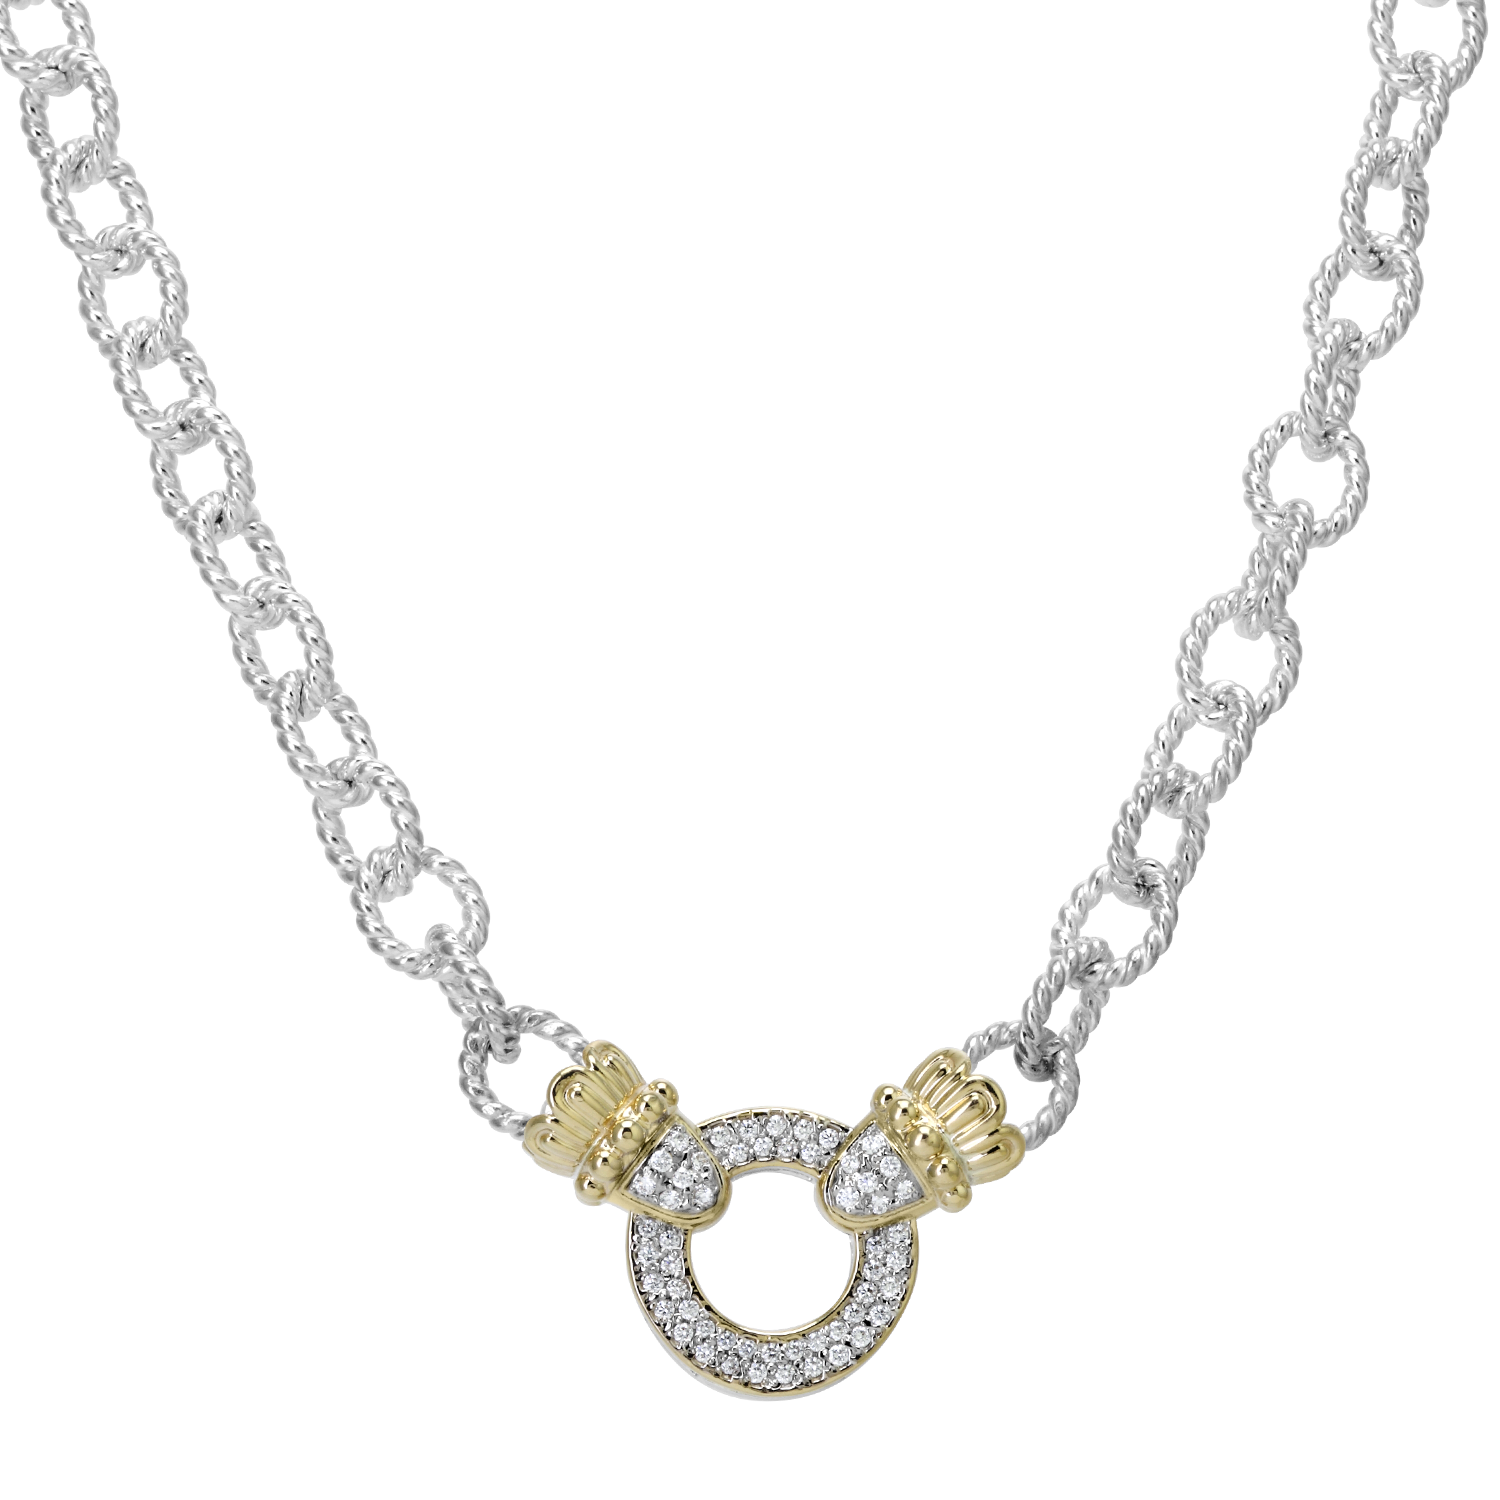 Vahan Le Cercle Sterling Silver & Yellow Gold Diamond Necklace Javeri Jewelers Inc Frisco, TX